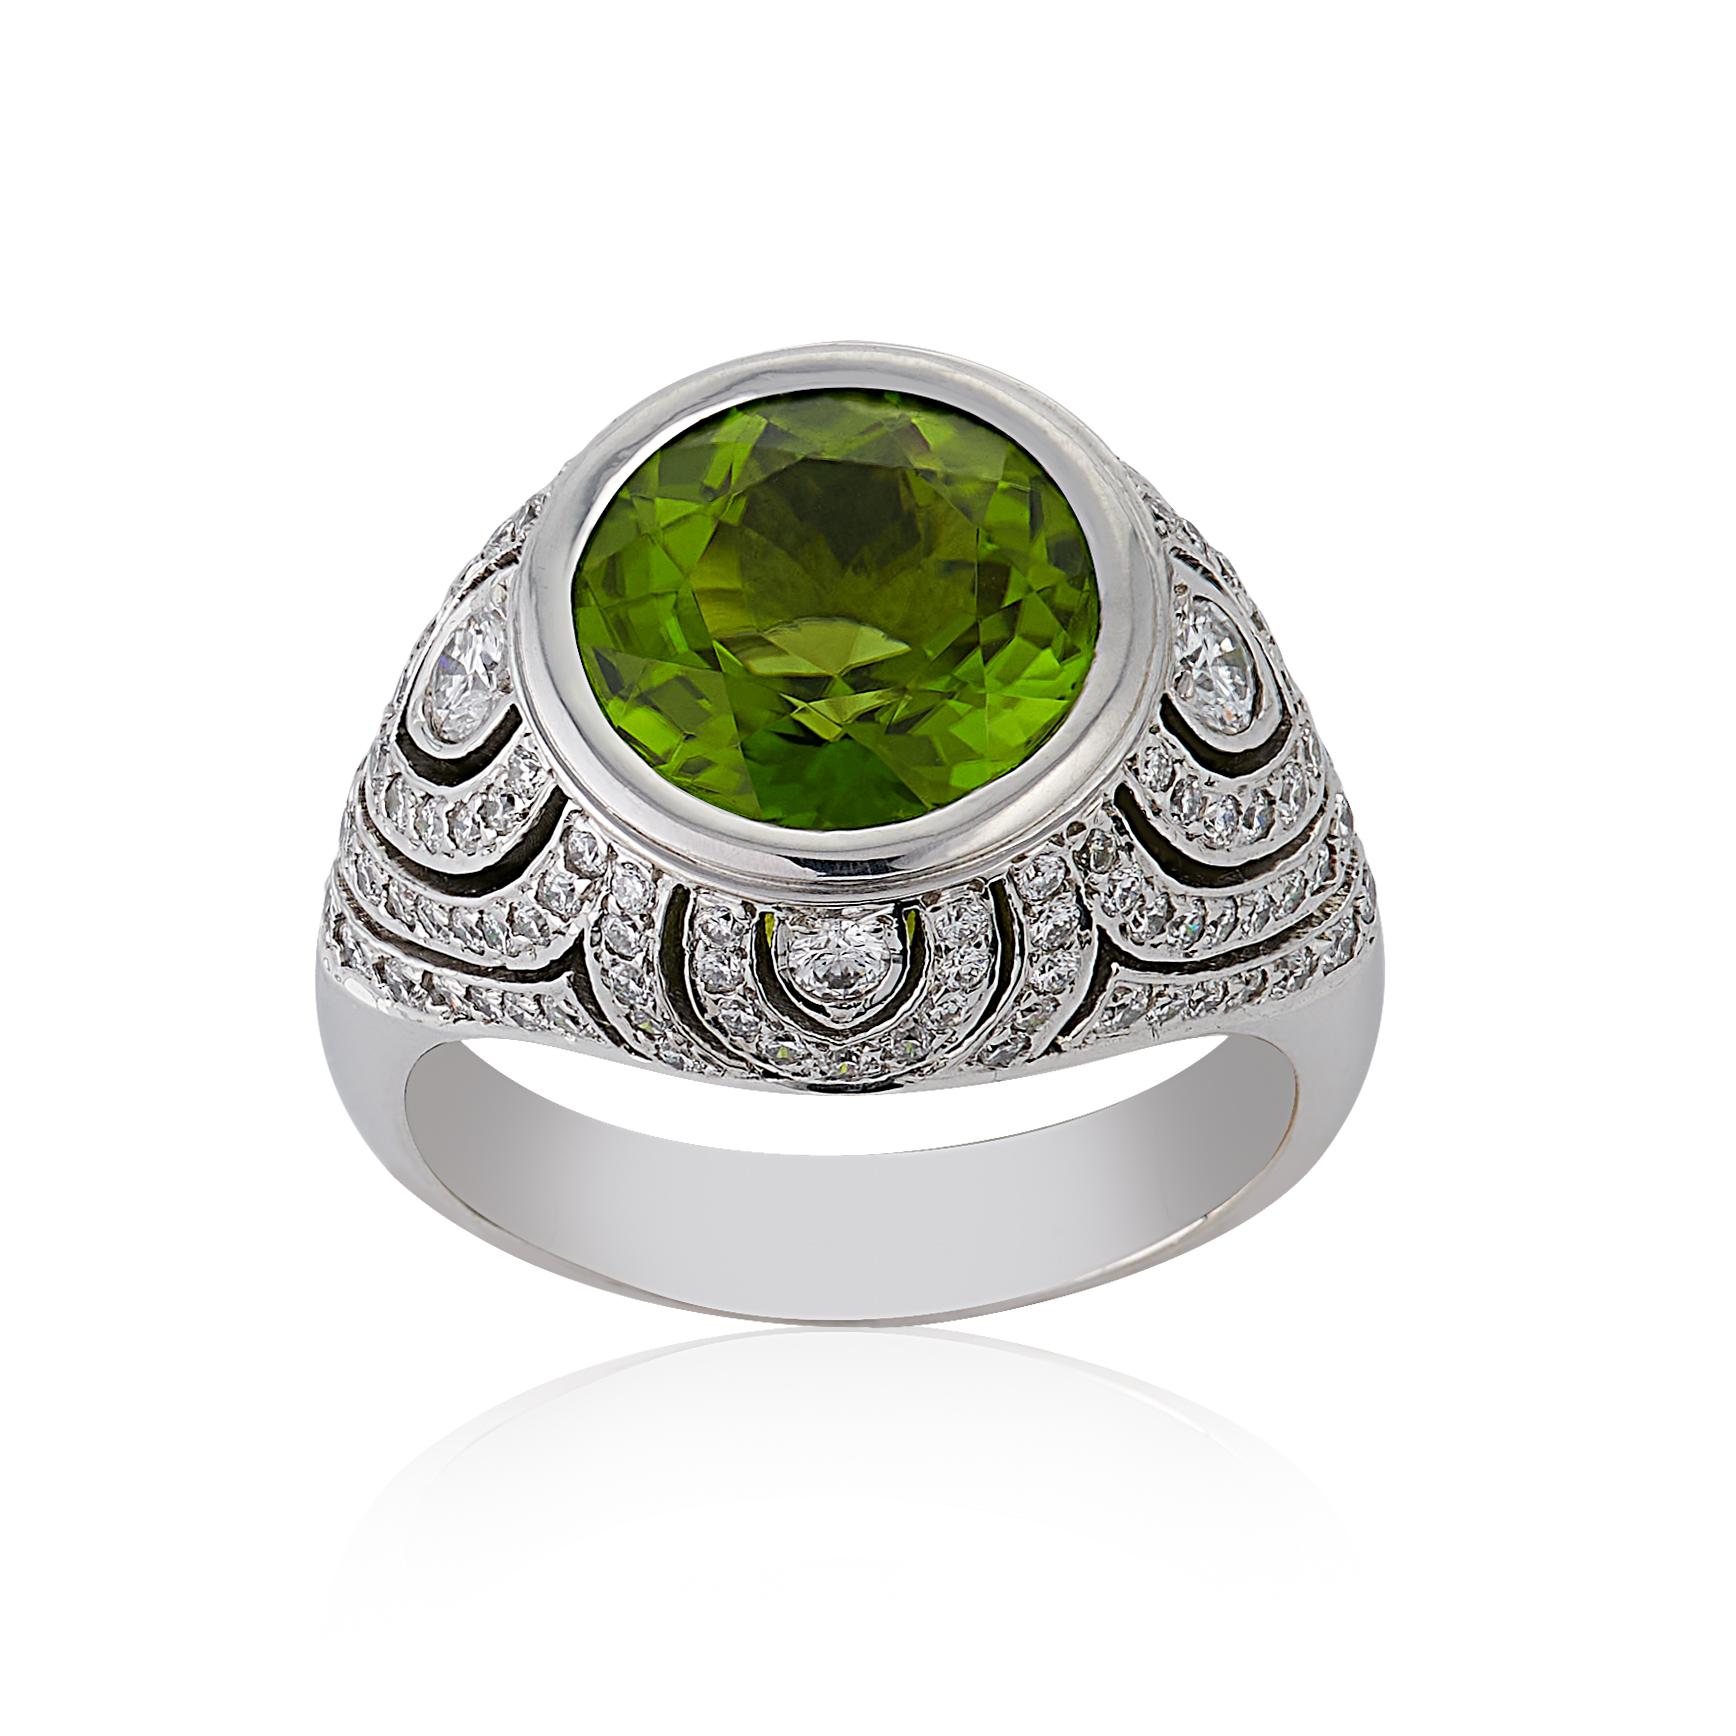 E Wolfe & Co Handmade 18ct White Gold Peridot and Diamond Cocktail Ring. The peridot centre stone weighs 6.26 carats, is of extremely good colour and is surrounded by intricate detail which has been set with 1.74 carats of G colour and VS clarity